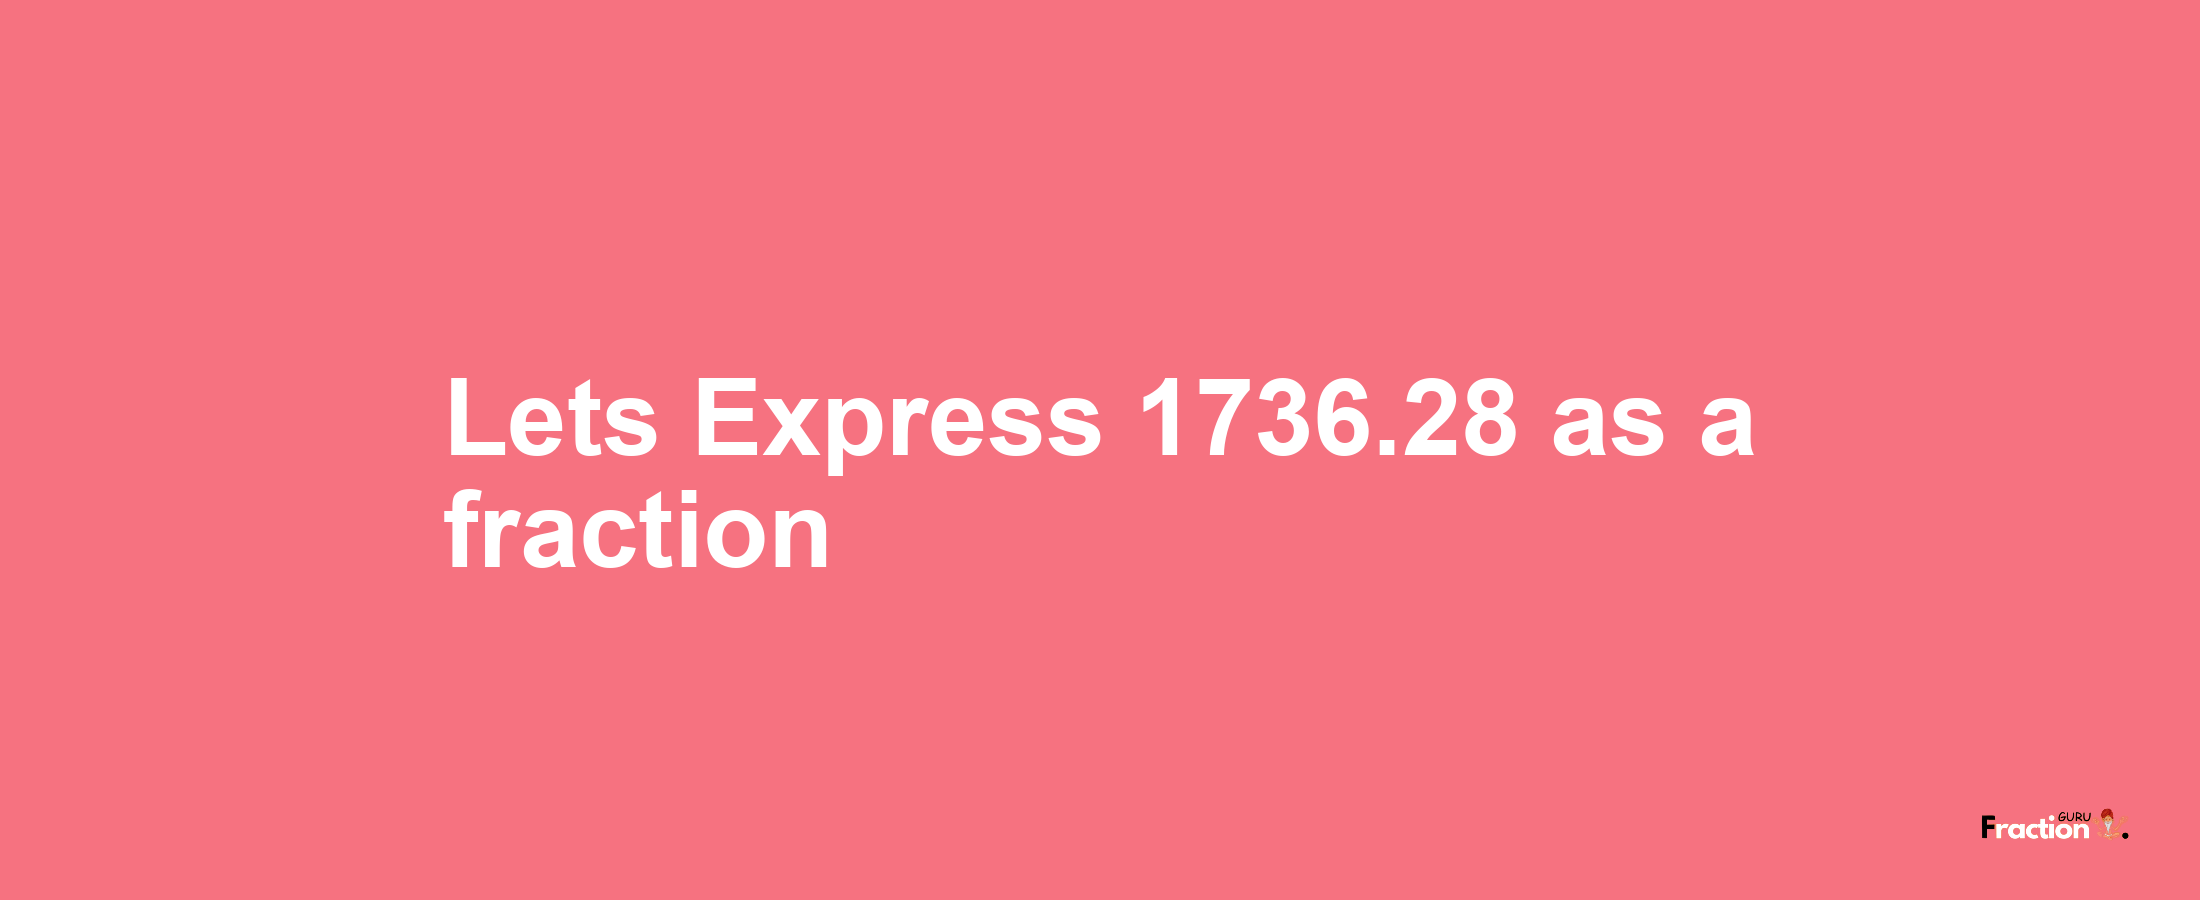 Lets Express 1736.28 as afraction